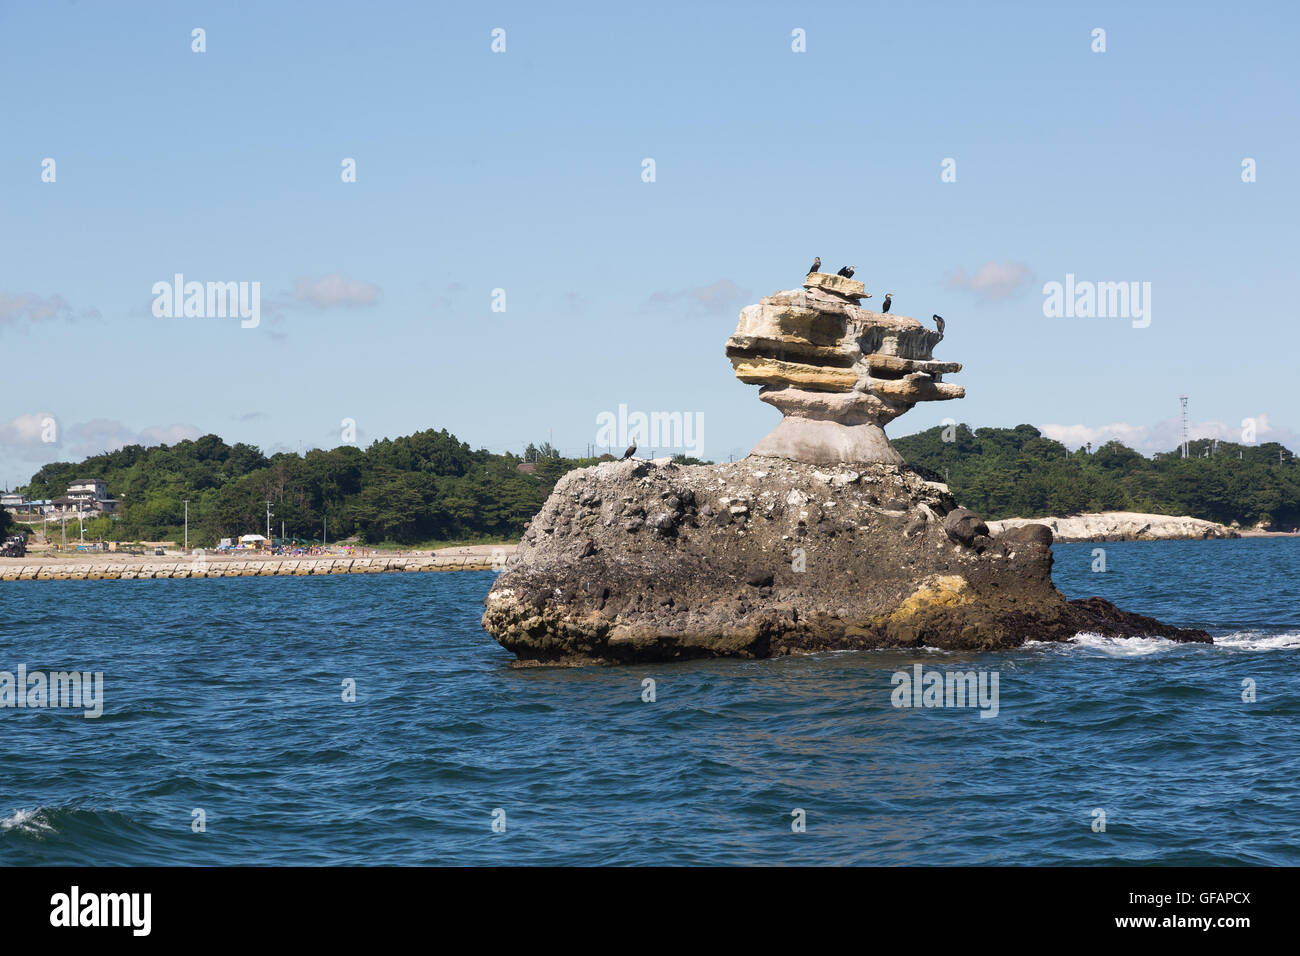 A general view of Matsushima Bay seen from a boat as part of the ''1000km Relay to Tokyo 2016'' promotion event in Matsushima on July 30, 2016, Miyagi, Japan. There are about 260 small islands in the bay, whose name means Pine Islands. At the time of the March 2011 earthquake and tsunami the islands served as a natural barrier weakening the impact of the tsunami on the coastal town. Matsushima is one of the most popular spots to visit for tourists in the region. © Rodrigo Reyes Marin/AFLO/Alamy Live News Stock Photo